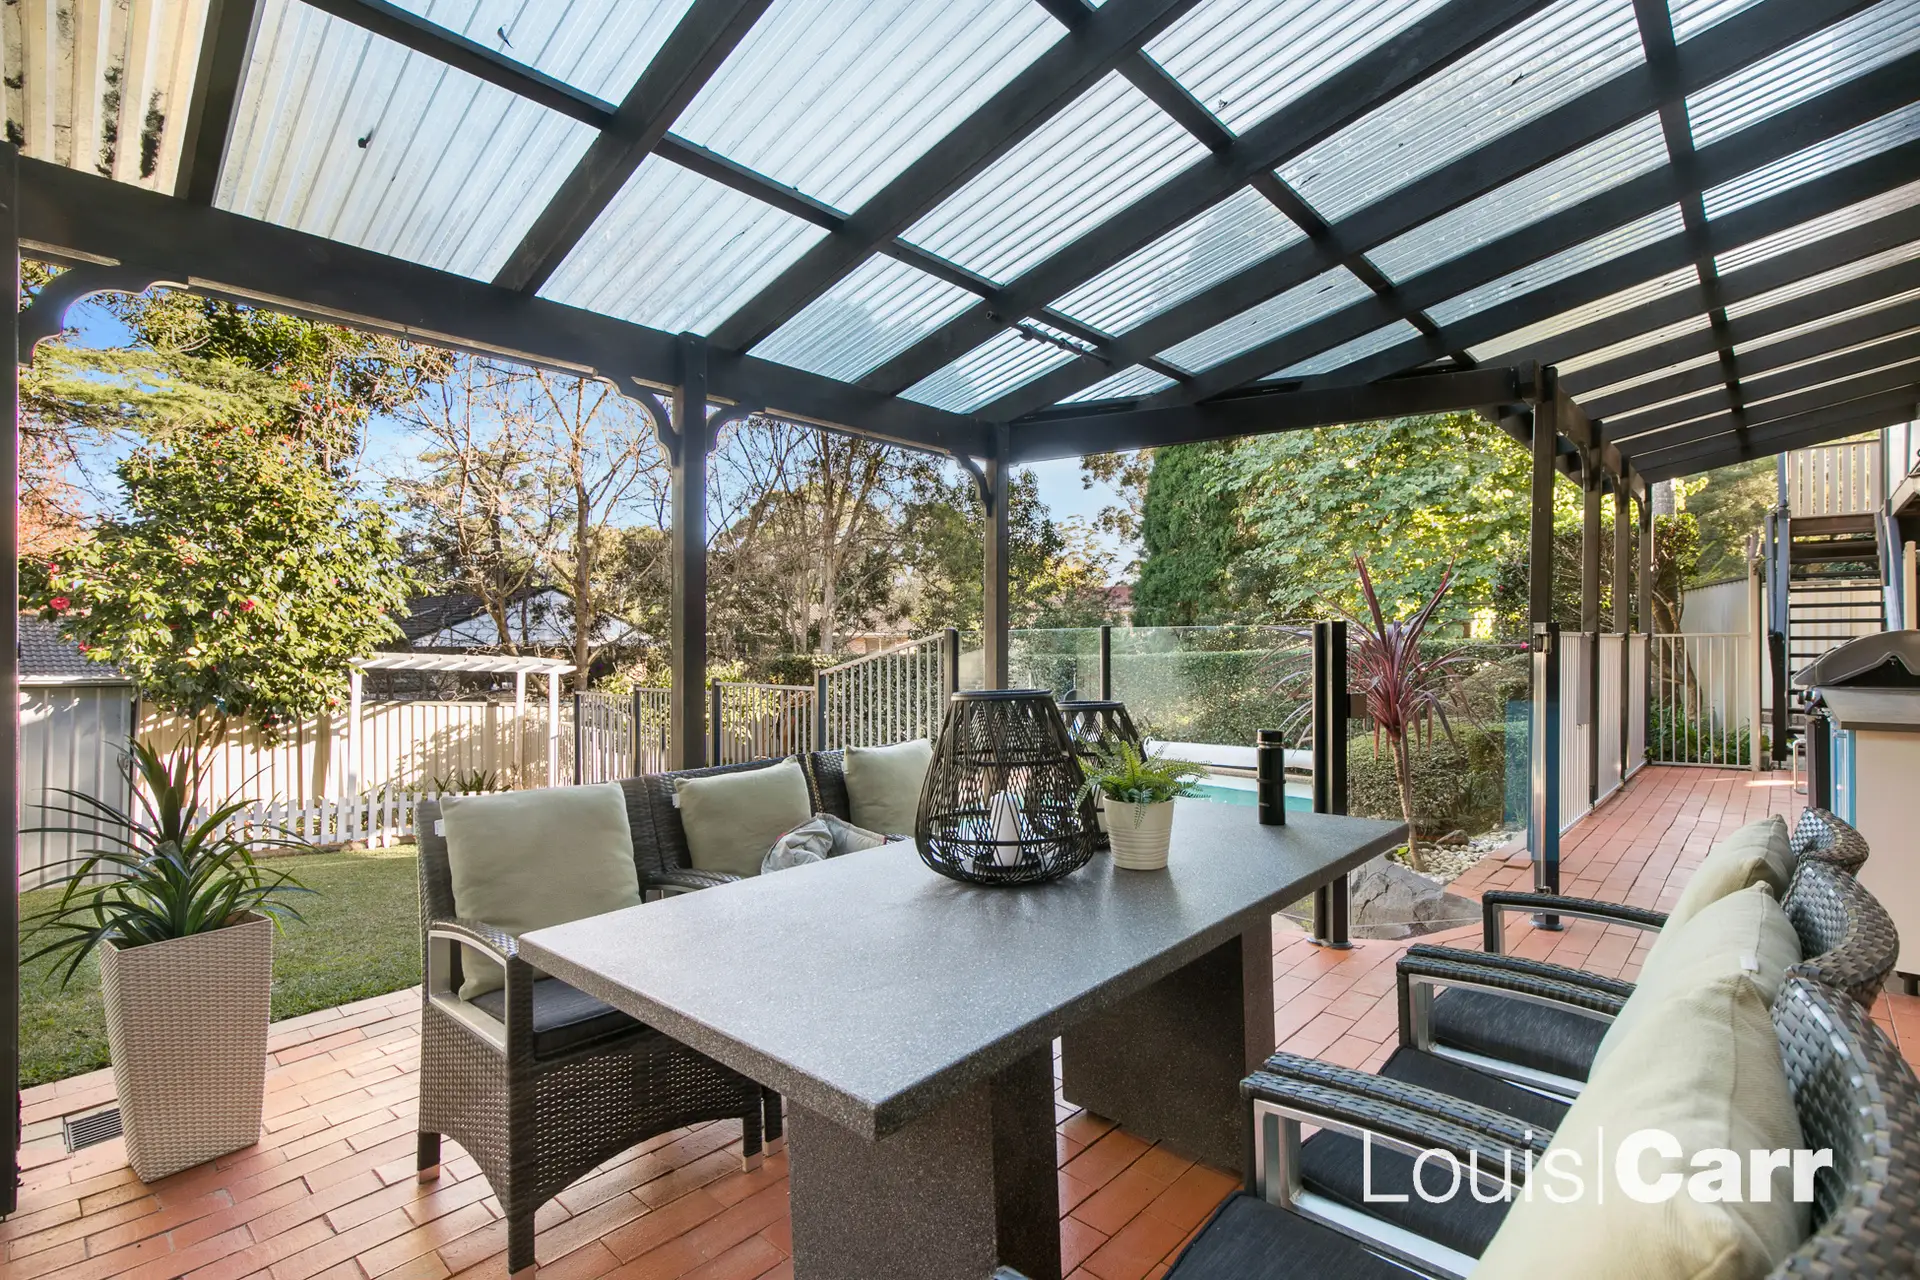 29 Gumnut Road, Cherrybrook Sold by Louis Carr Real Estate - image 1